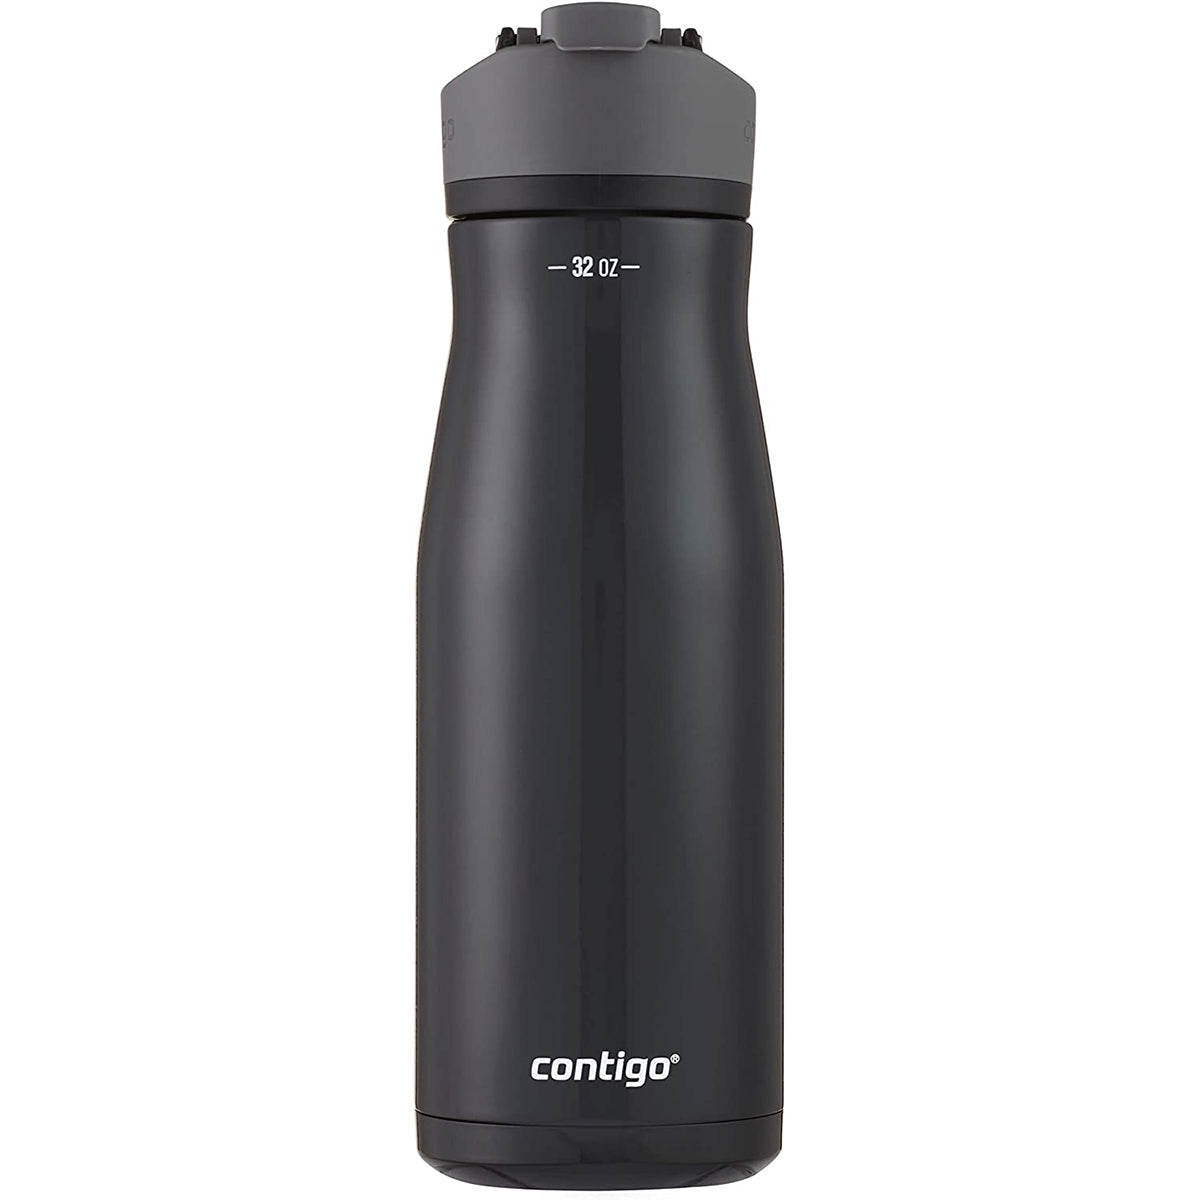 Product Review: Contigo Ashland Chill Stainless Steel Water